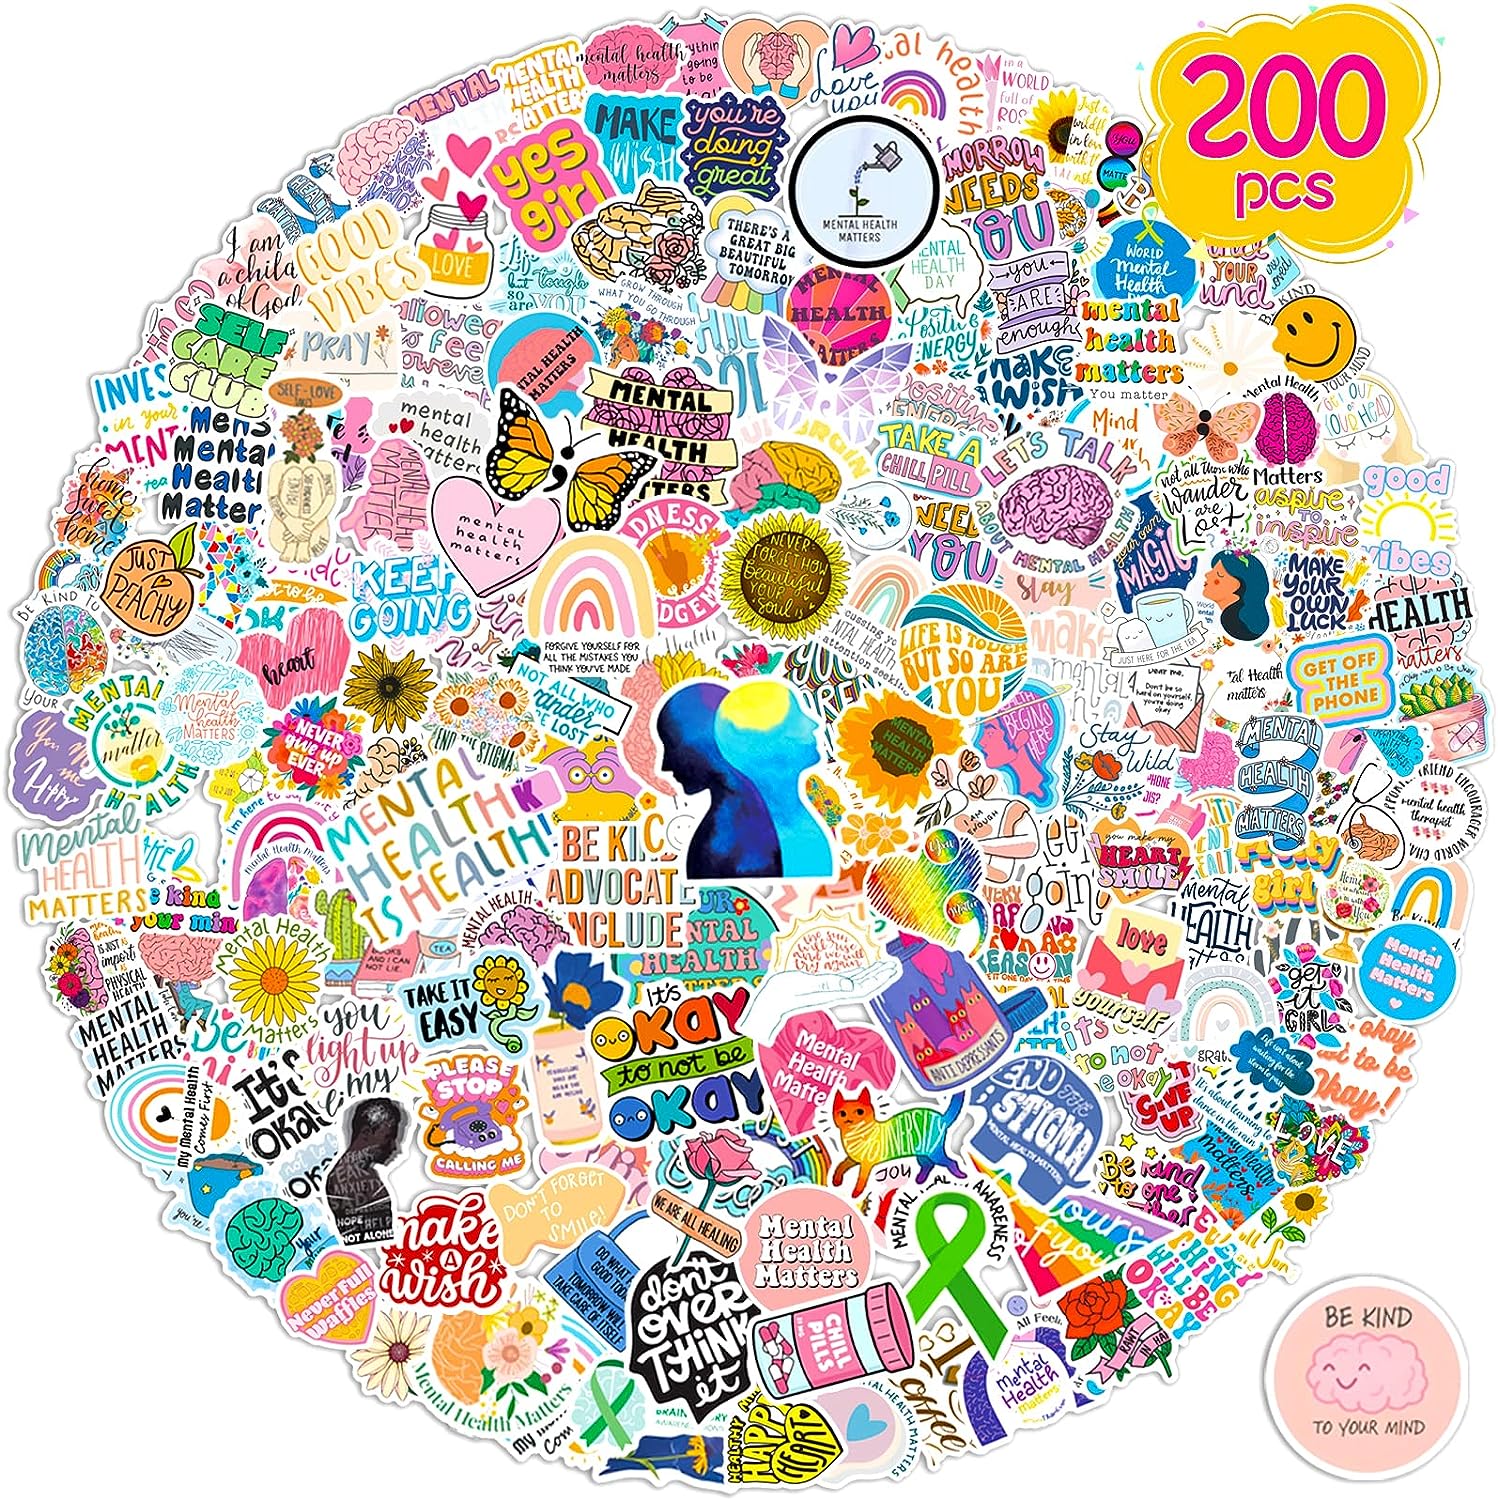 200 PCS colored mental health awareness stickers, gifts from mental health therapists, encouragement stickers, adult inspirational female male mental health gift stickers, waterproof vinyl aesthetic stickers